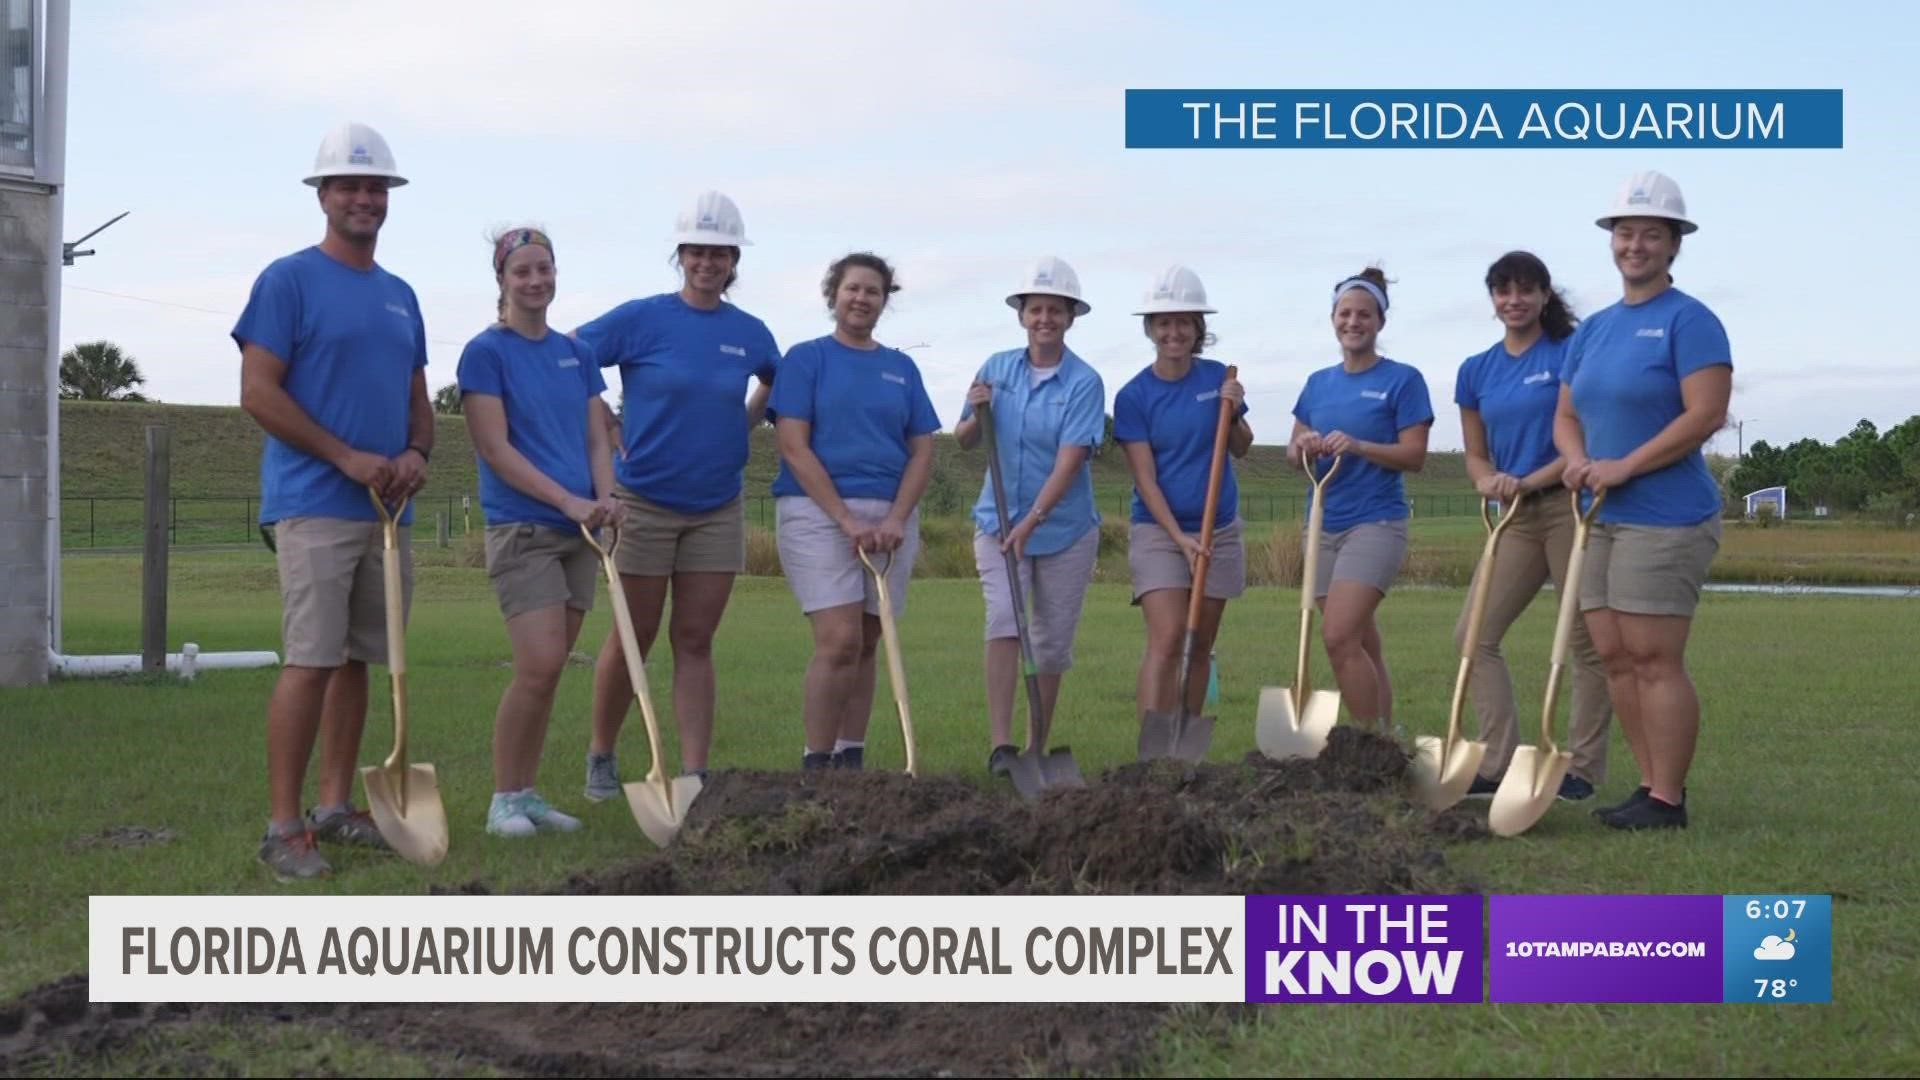 The facility will focus on preserving, breeding and rearing corals that are declining along Florida's Coral Reef.